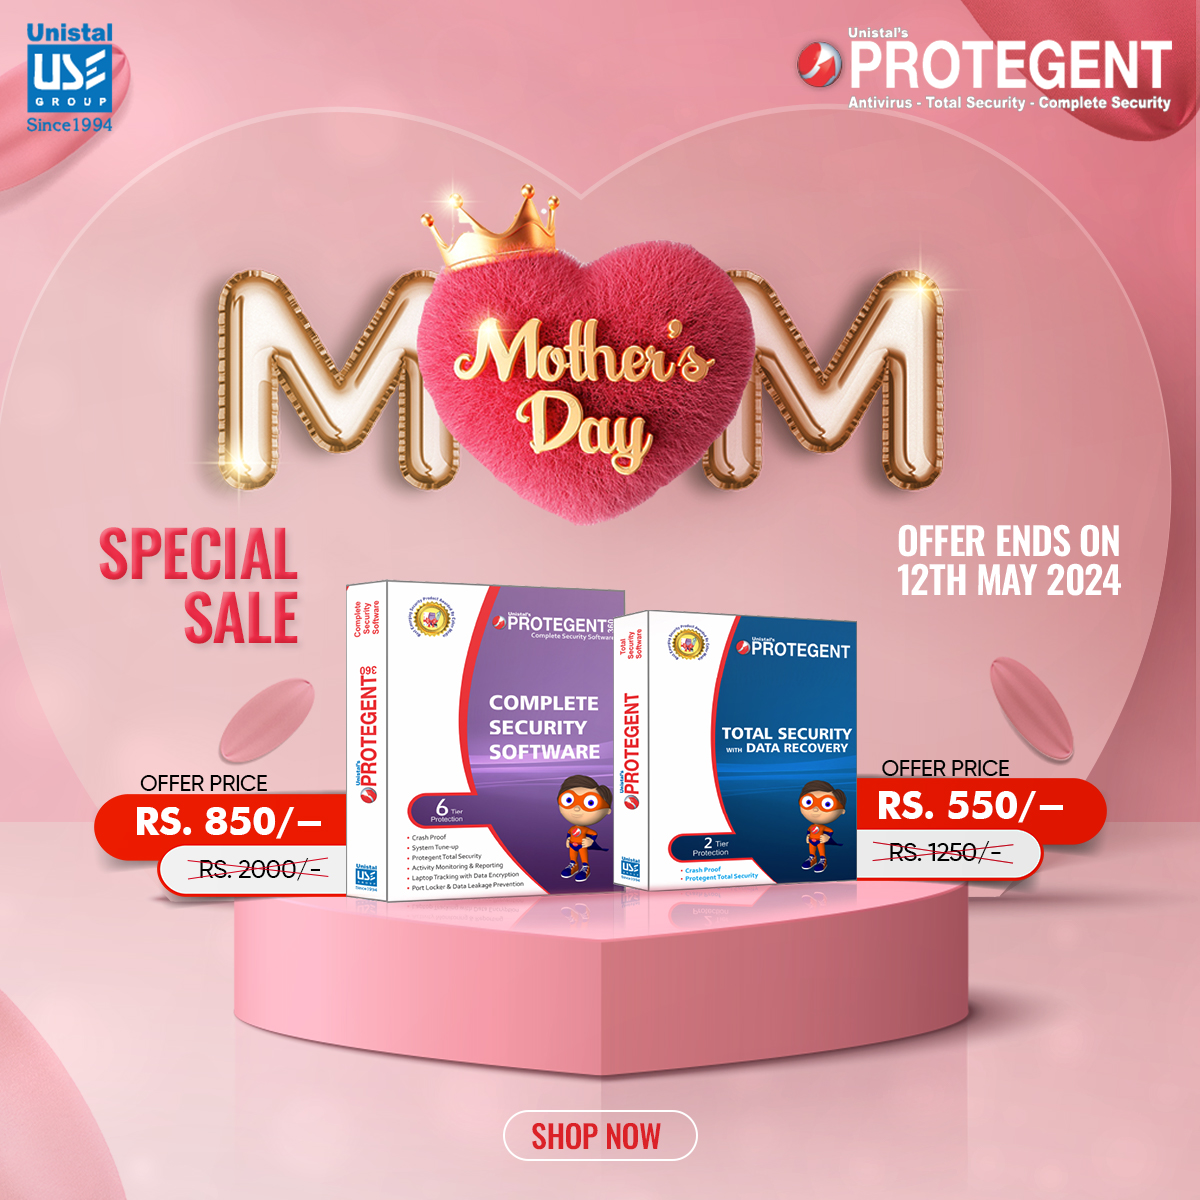 Now, purchase Protegent Total Security for Rs.550 & Complete Security for Rs. 850. 
Grab this 'Hearting Deal' on or before 12th May'24. Buy today at protegent360.com 

#MothersDay #CyberSecurity #ProtegentProtection #PeaceOfMind #SecureTomorrow #LimitedTimeDeal